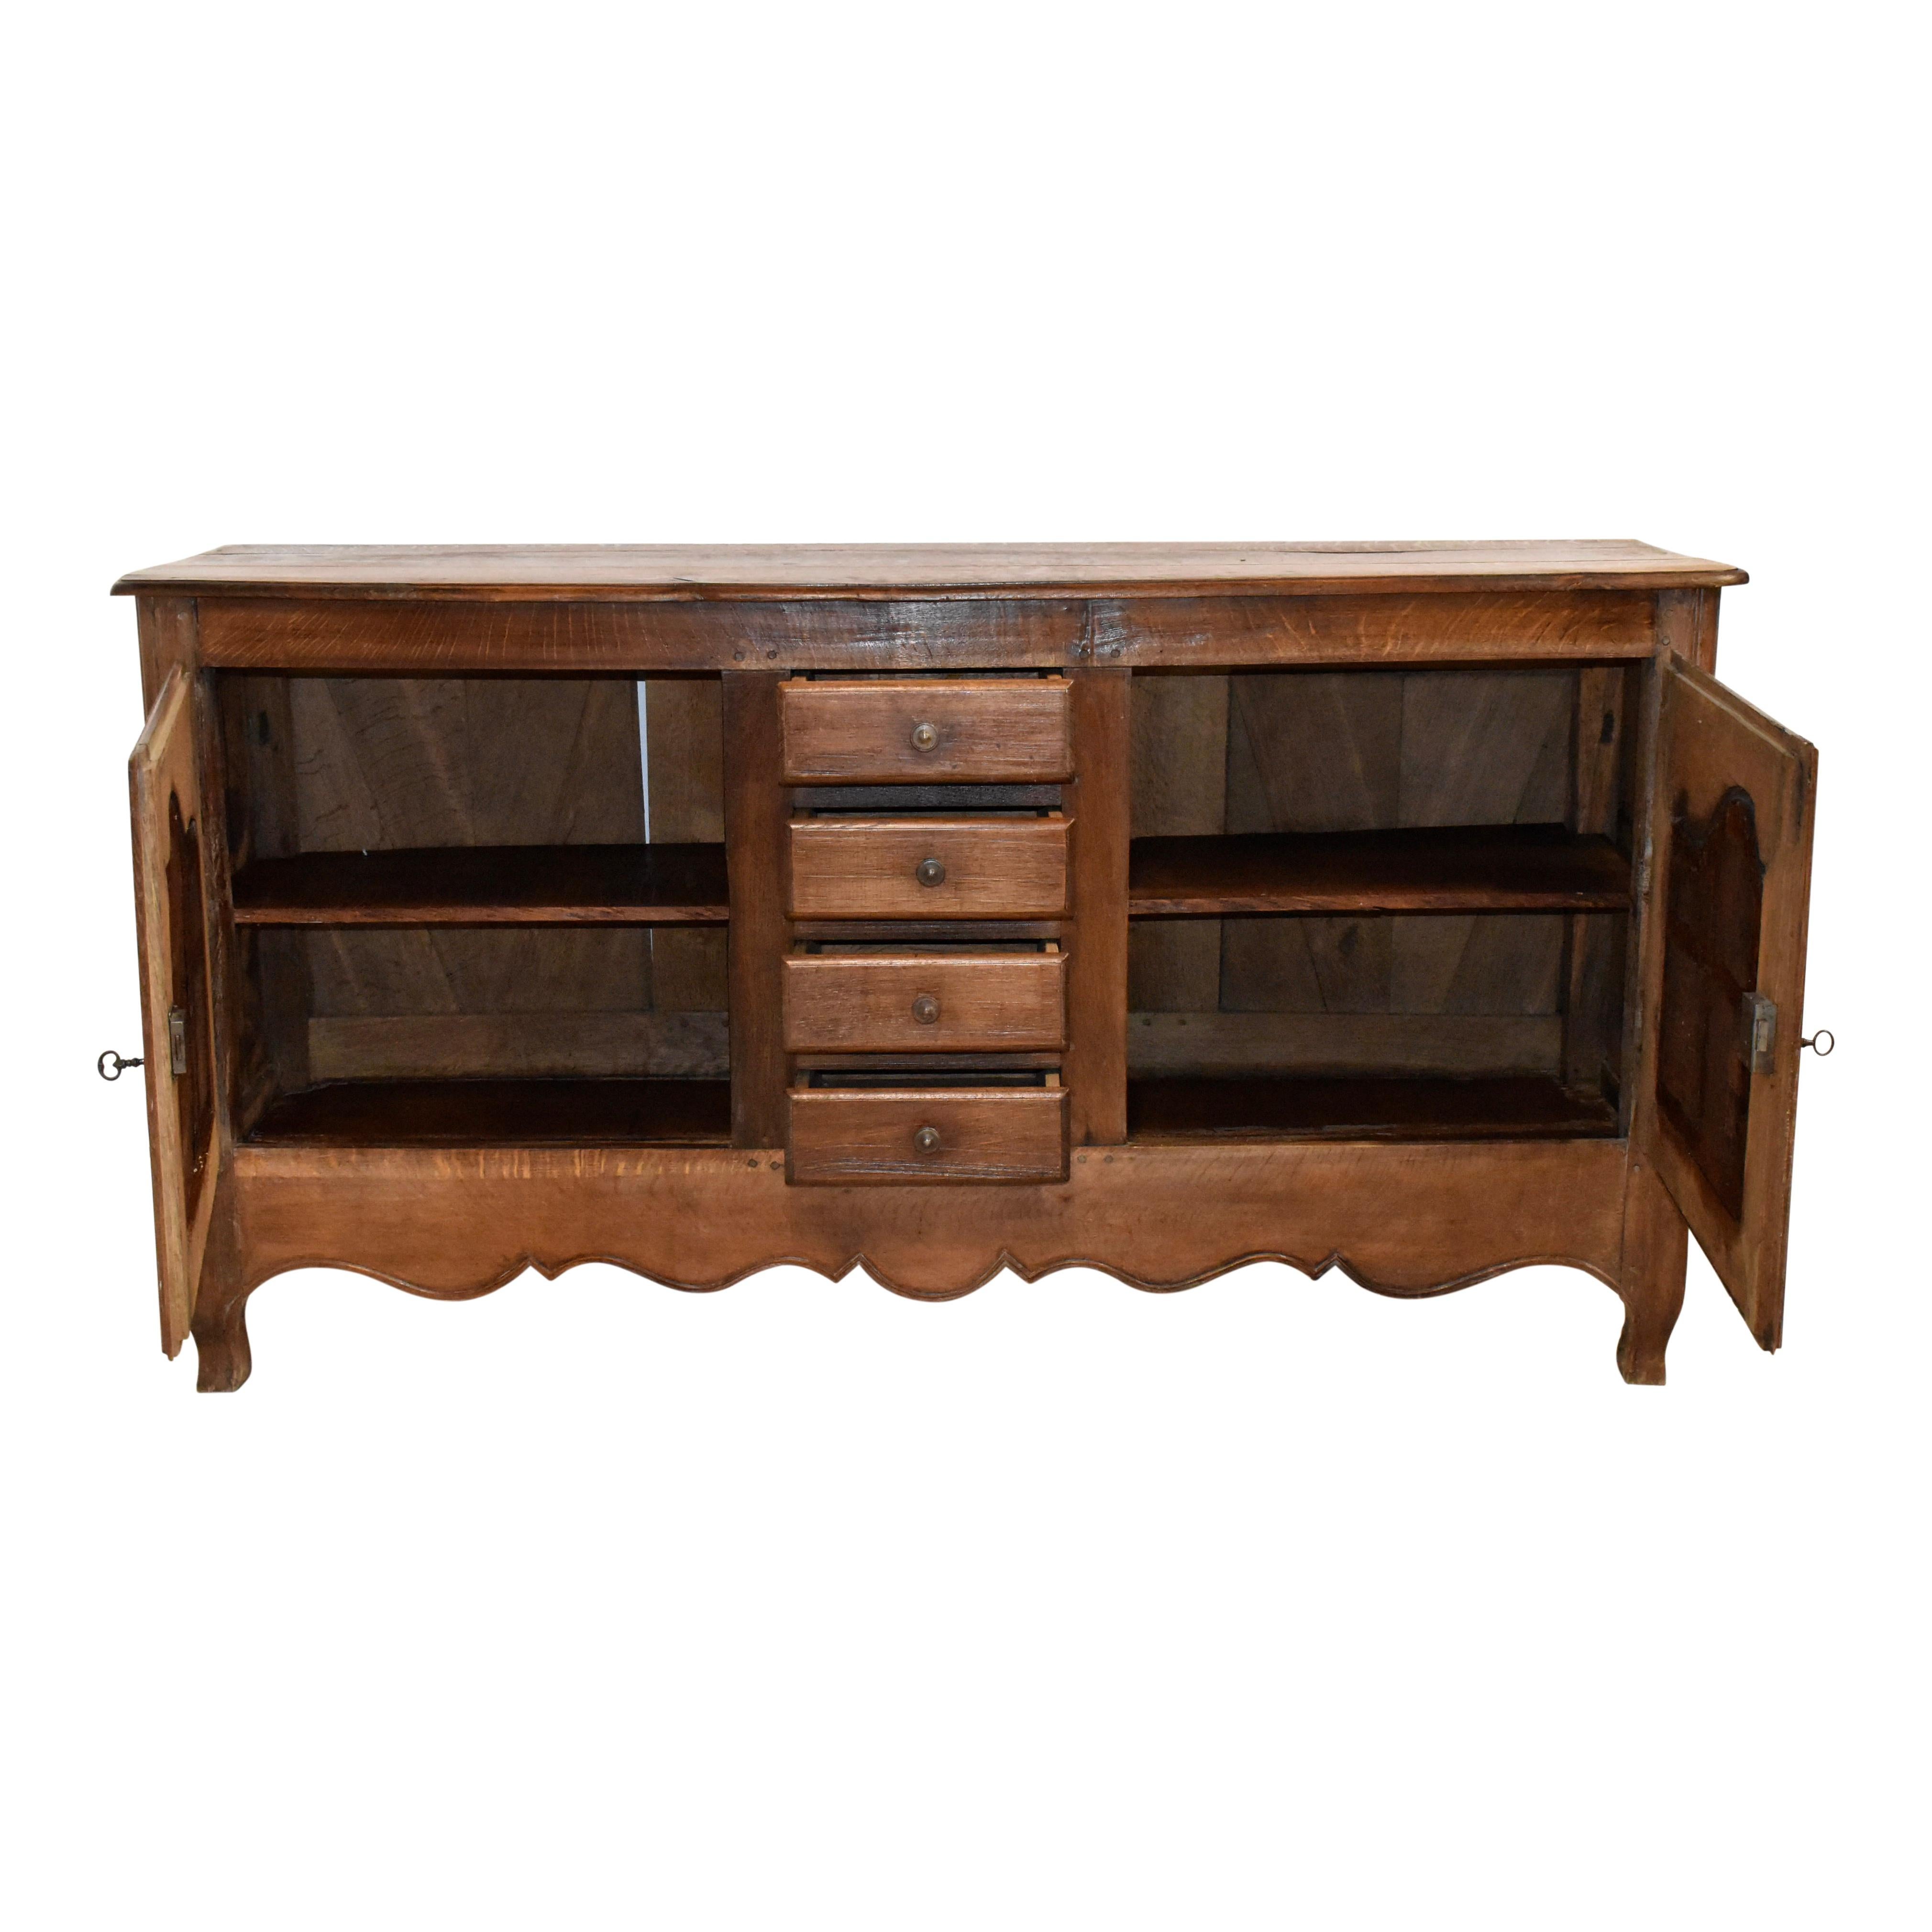 Belgian Rustic Oak Sideboard with Two Doors and Four Drawers, circa 1880 For Sale